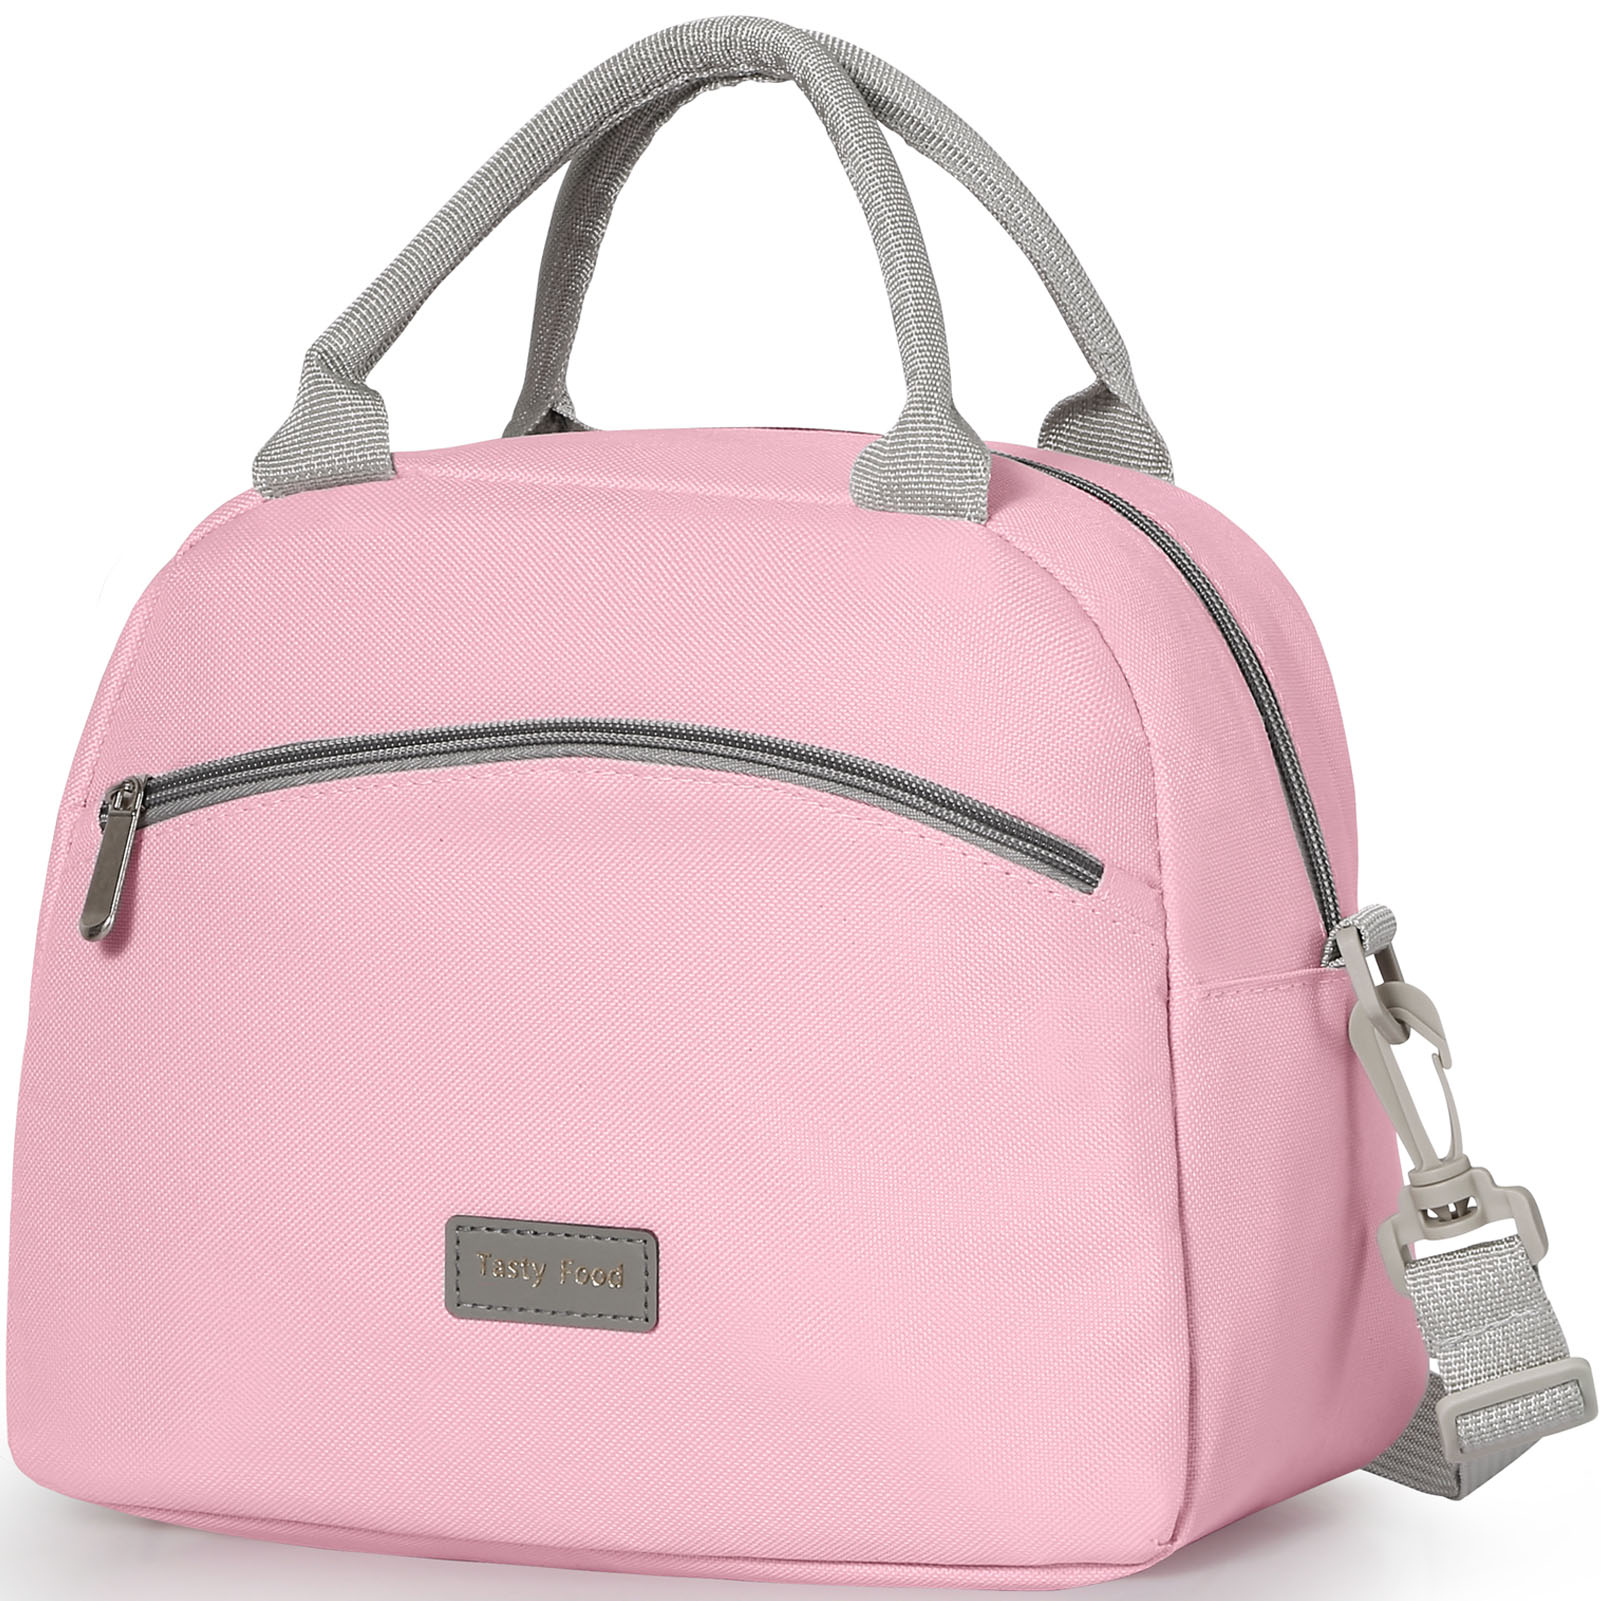 Lunch Bag Insulated Lunch Cooler, Pink